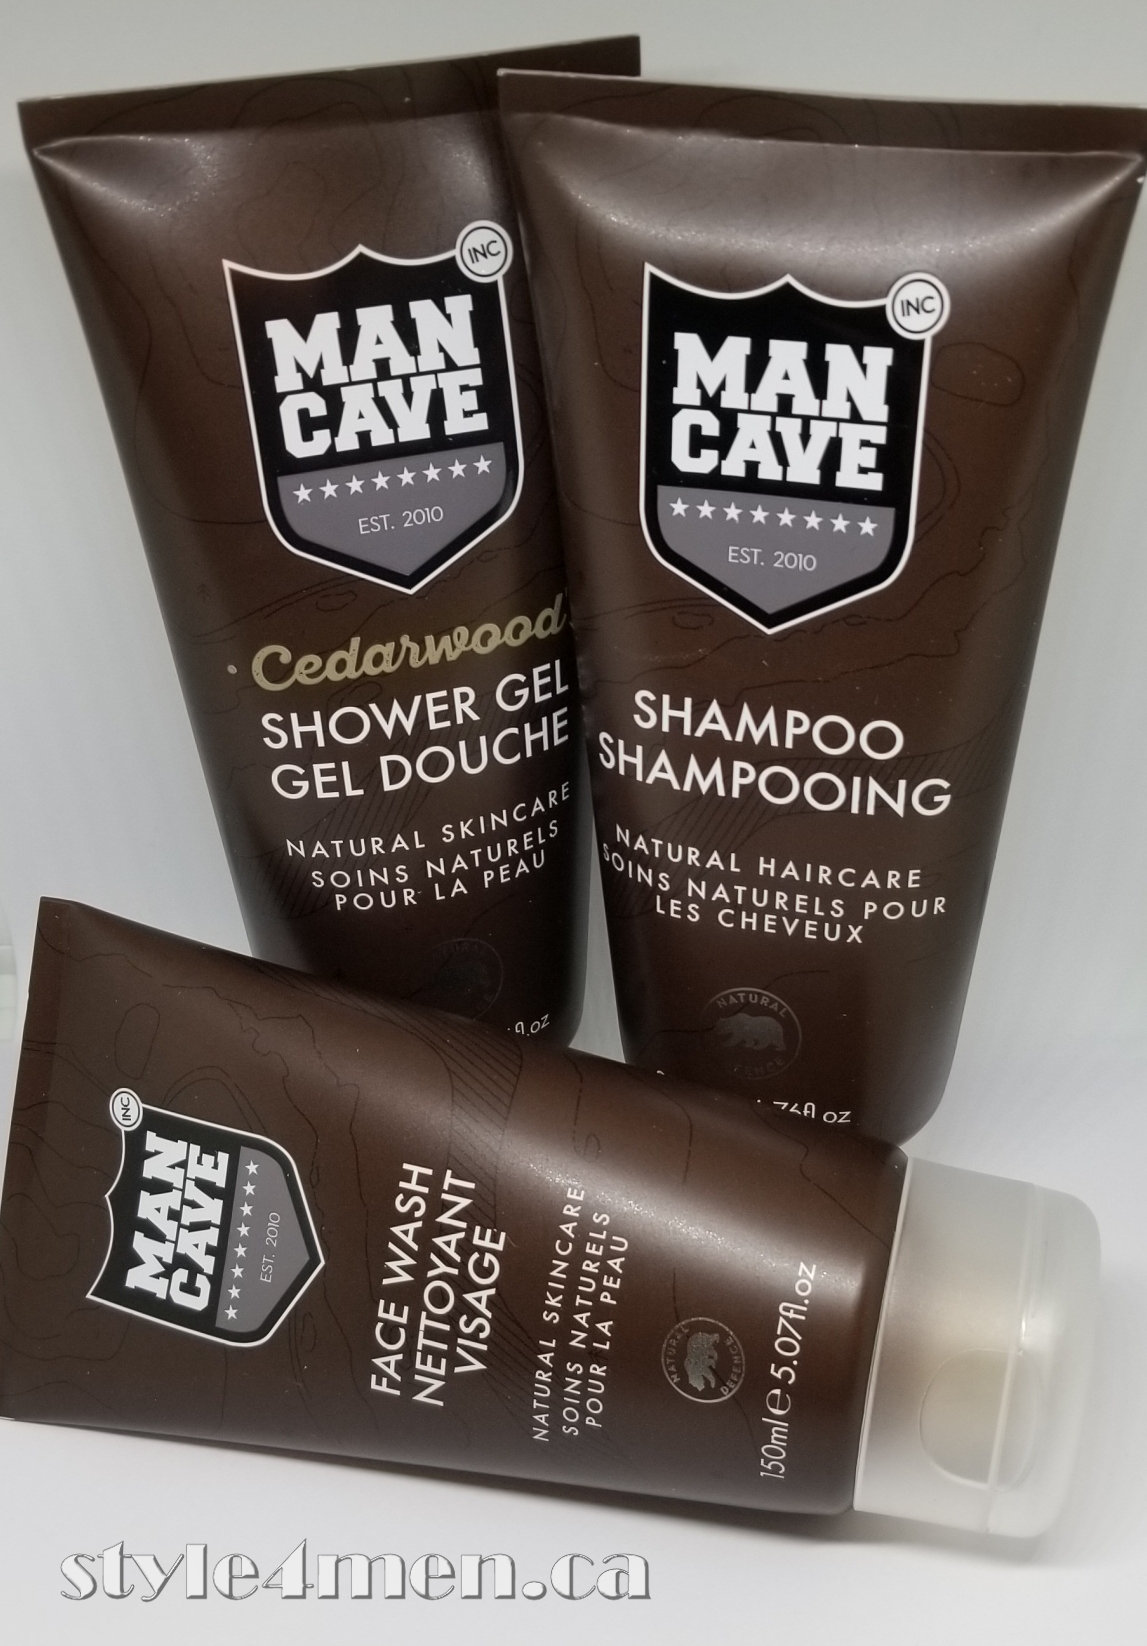 MANCAVE – All Over Body Kit